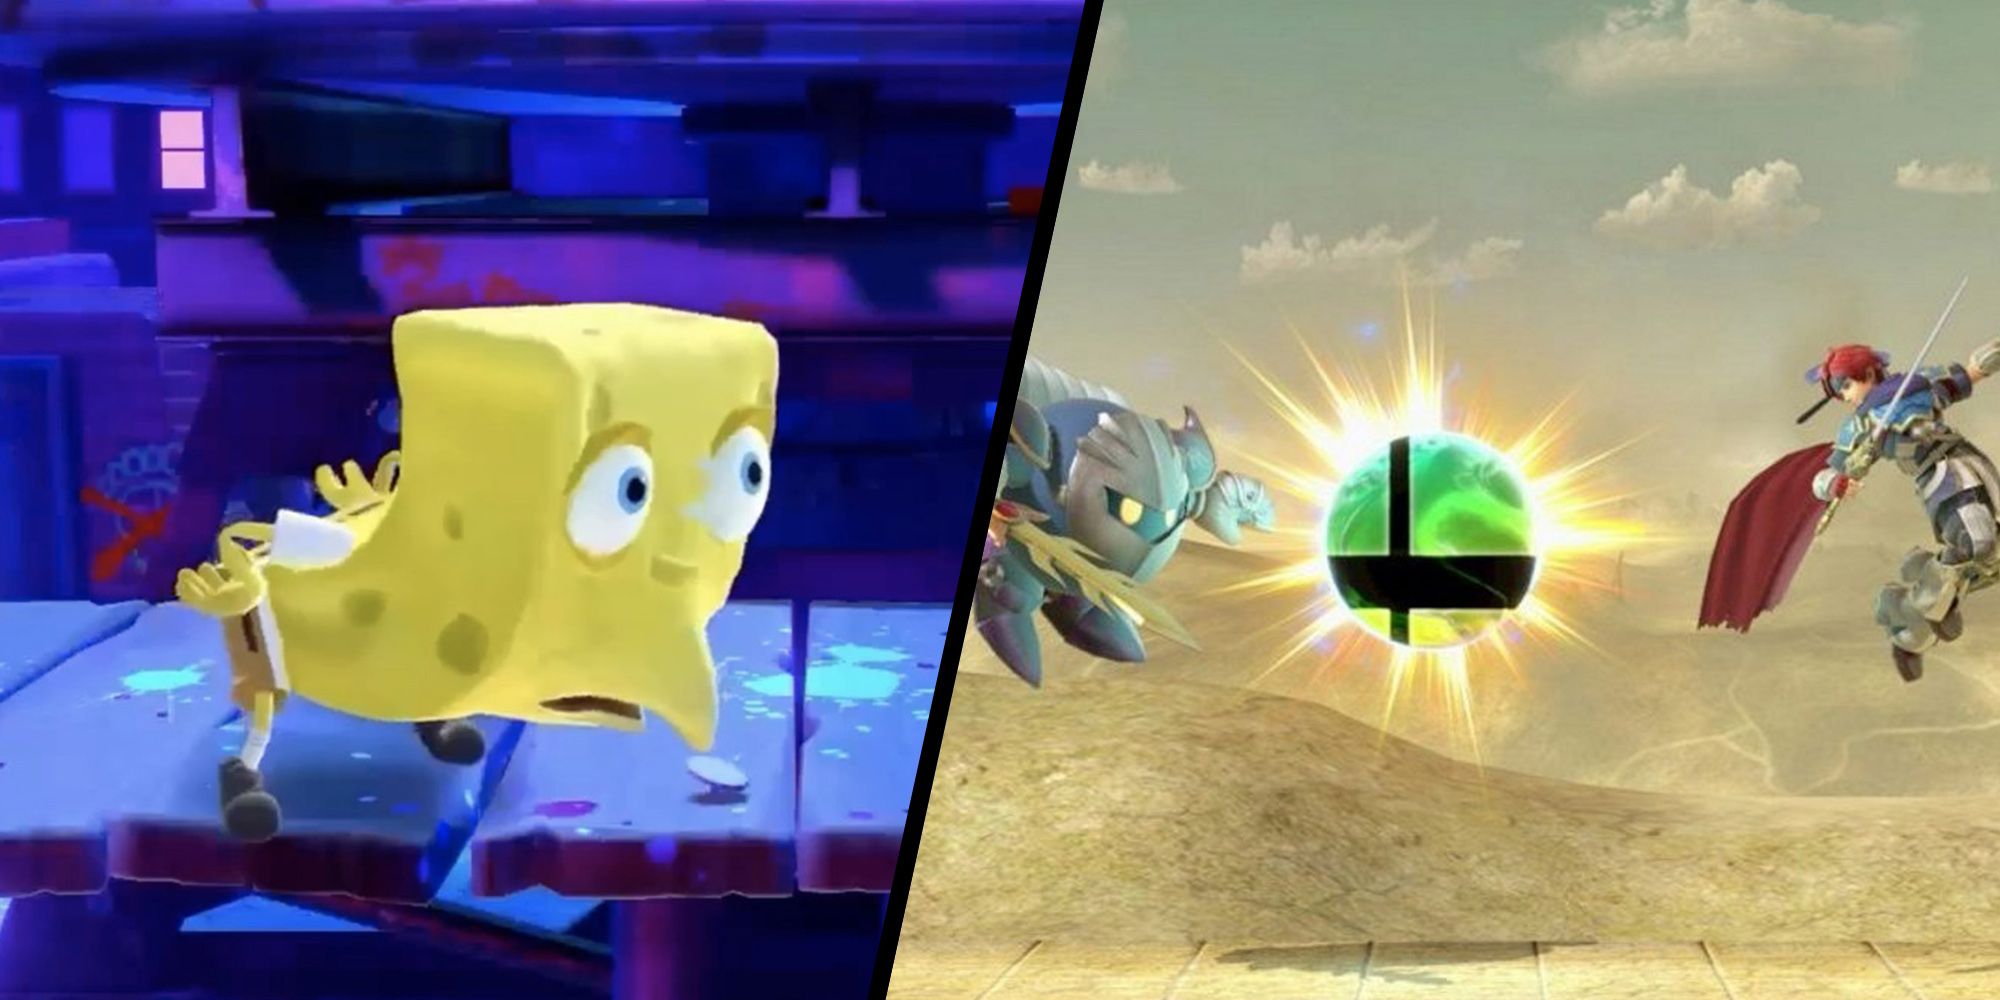 Spongebob Taunting In All-Star Brawl Next To A Smash Ball In Smash Ultimate